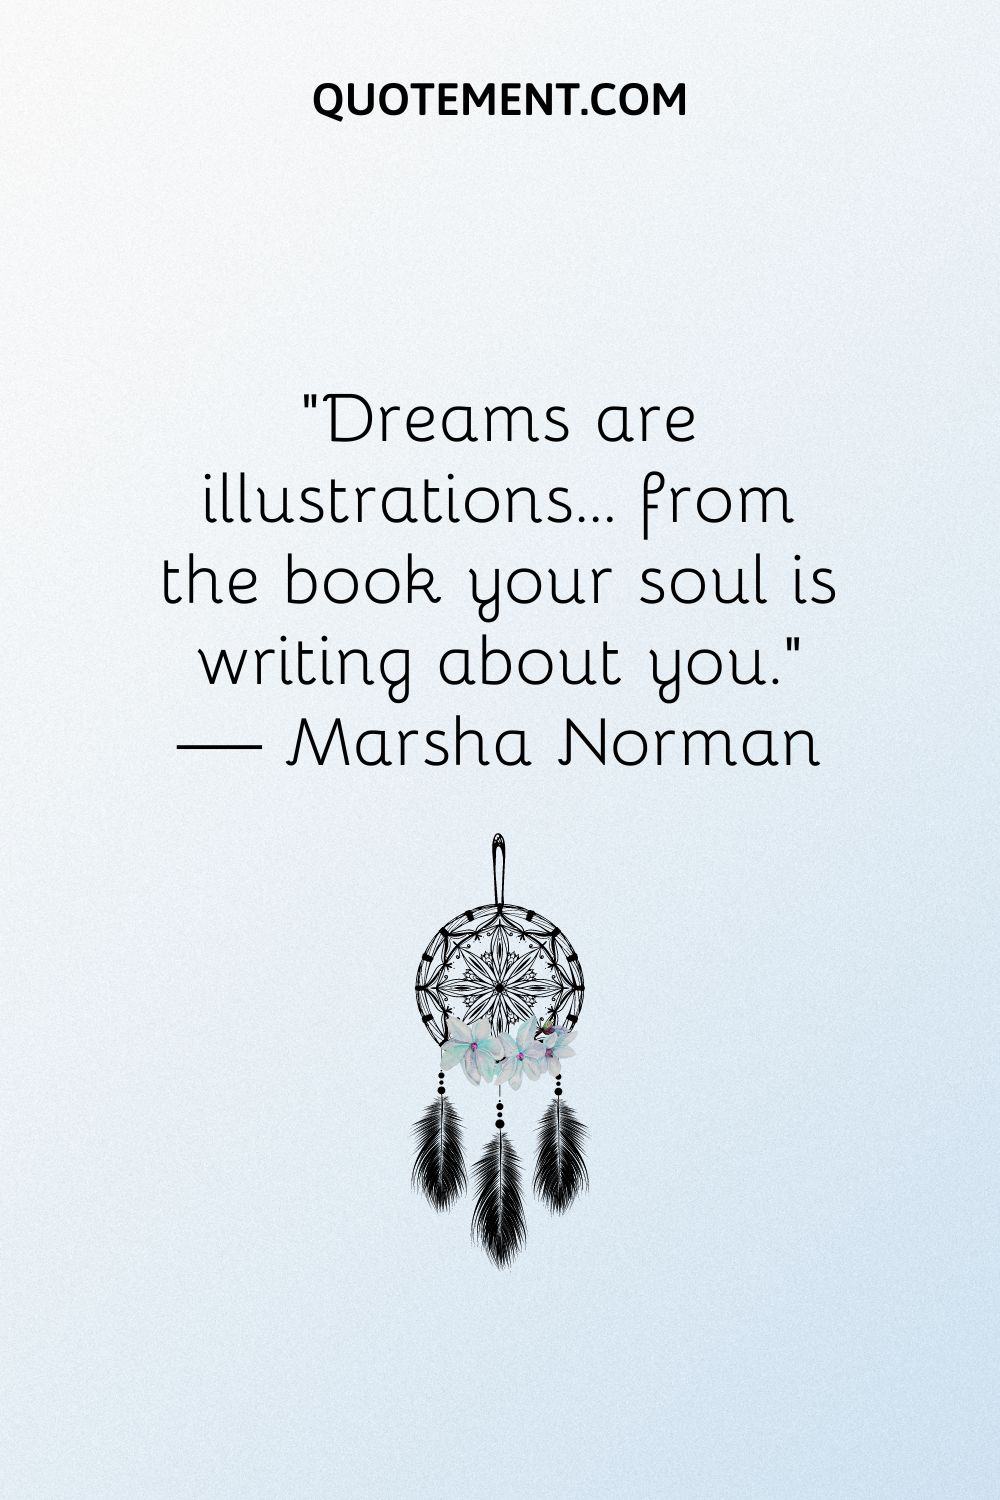 image of a dreamcatcher representing best follow your dreams quote